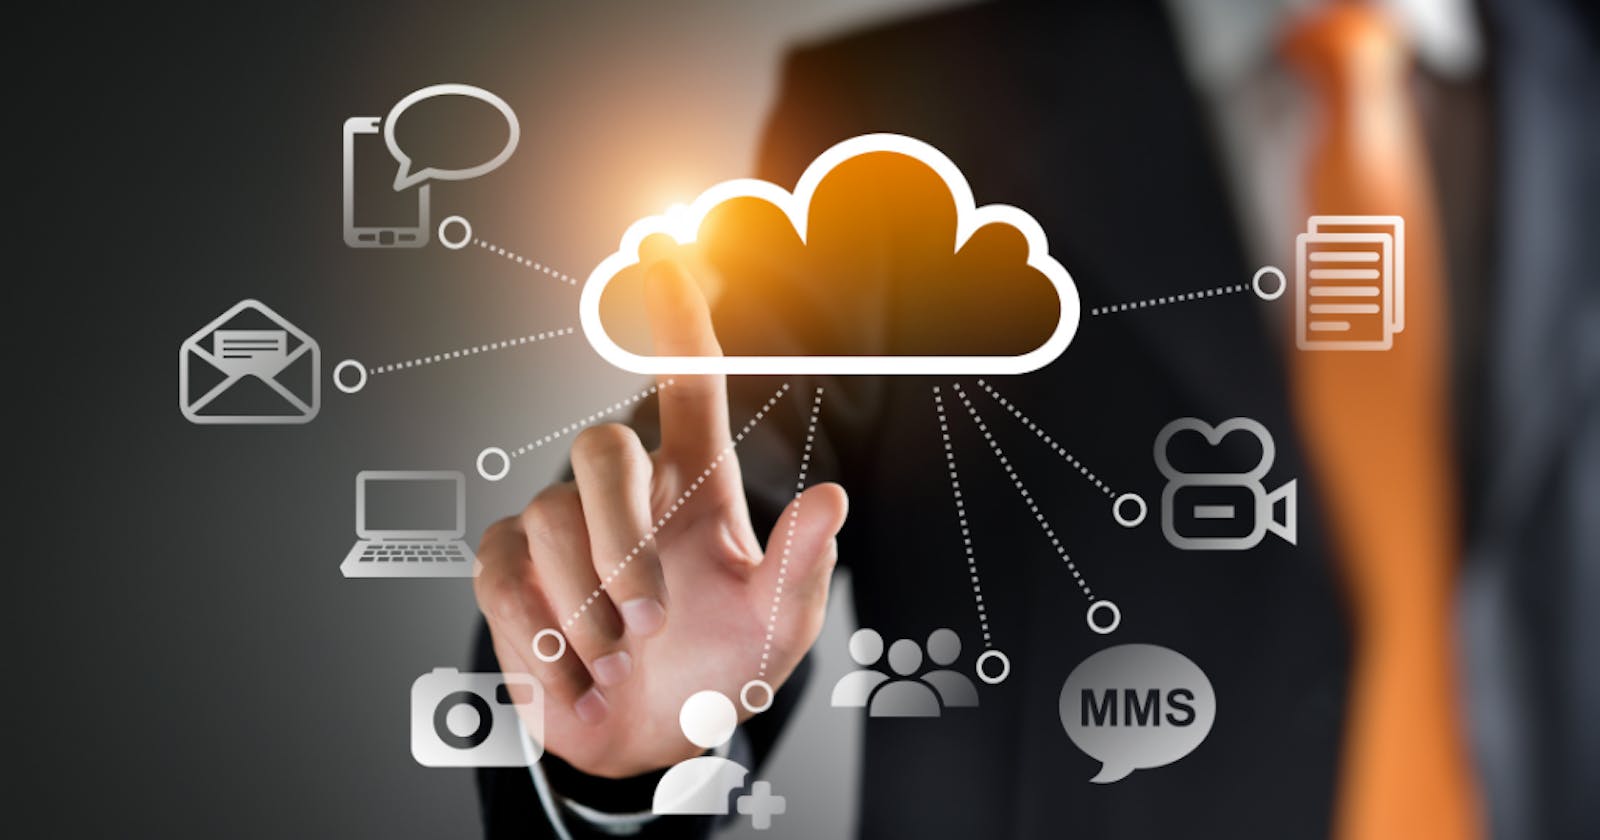 Title: Are Cloud Services Overcharging? Here are Some Free and Inexpensive Alternatives